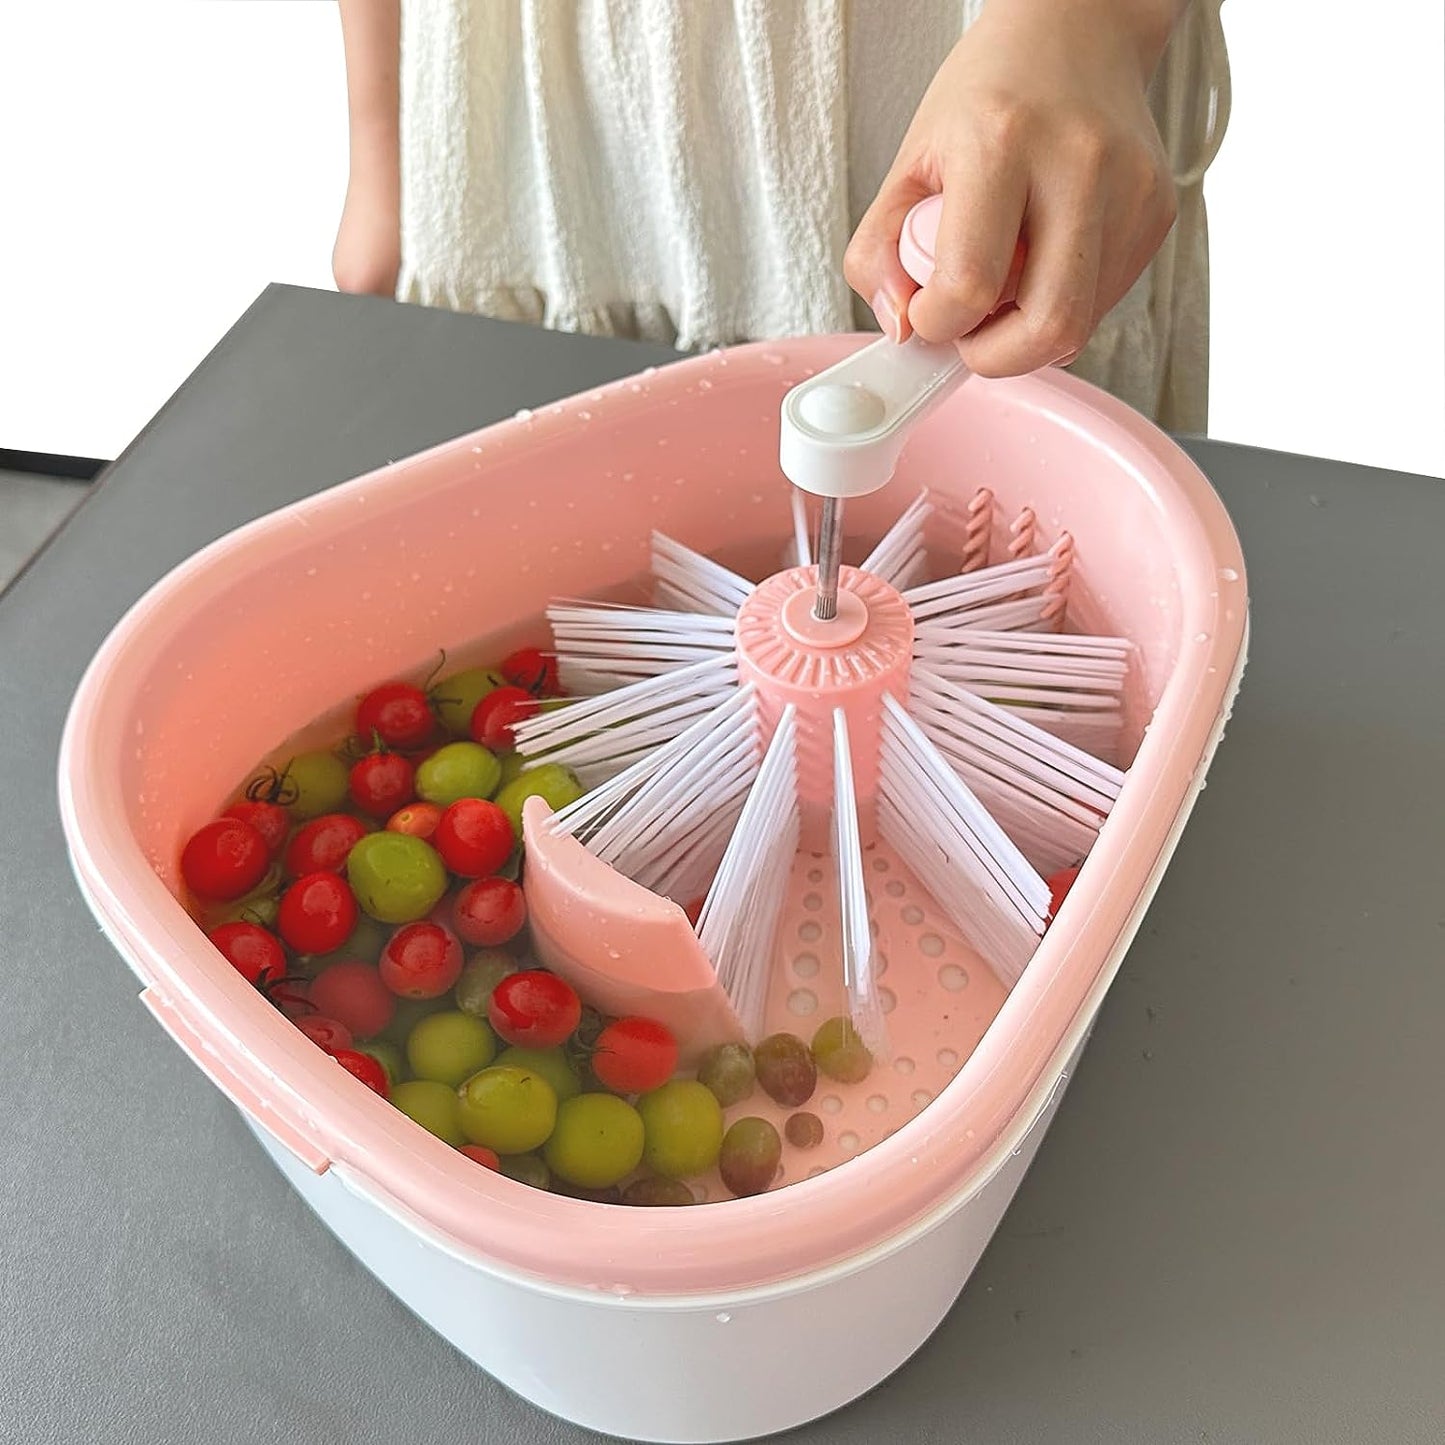 Fruit and Vegetable Washing Machine, Portable Fruit Cleaner Device